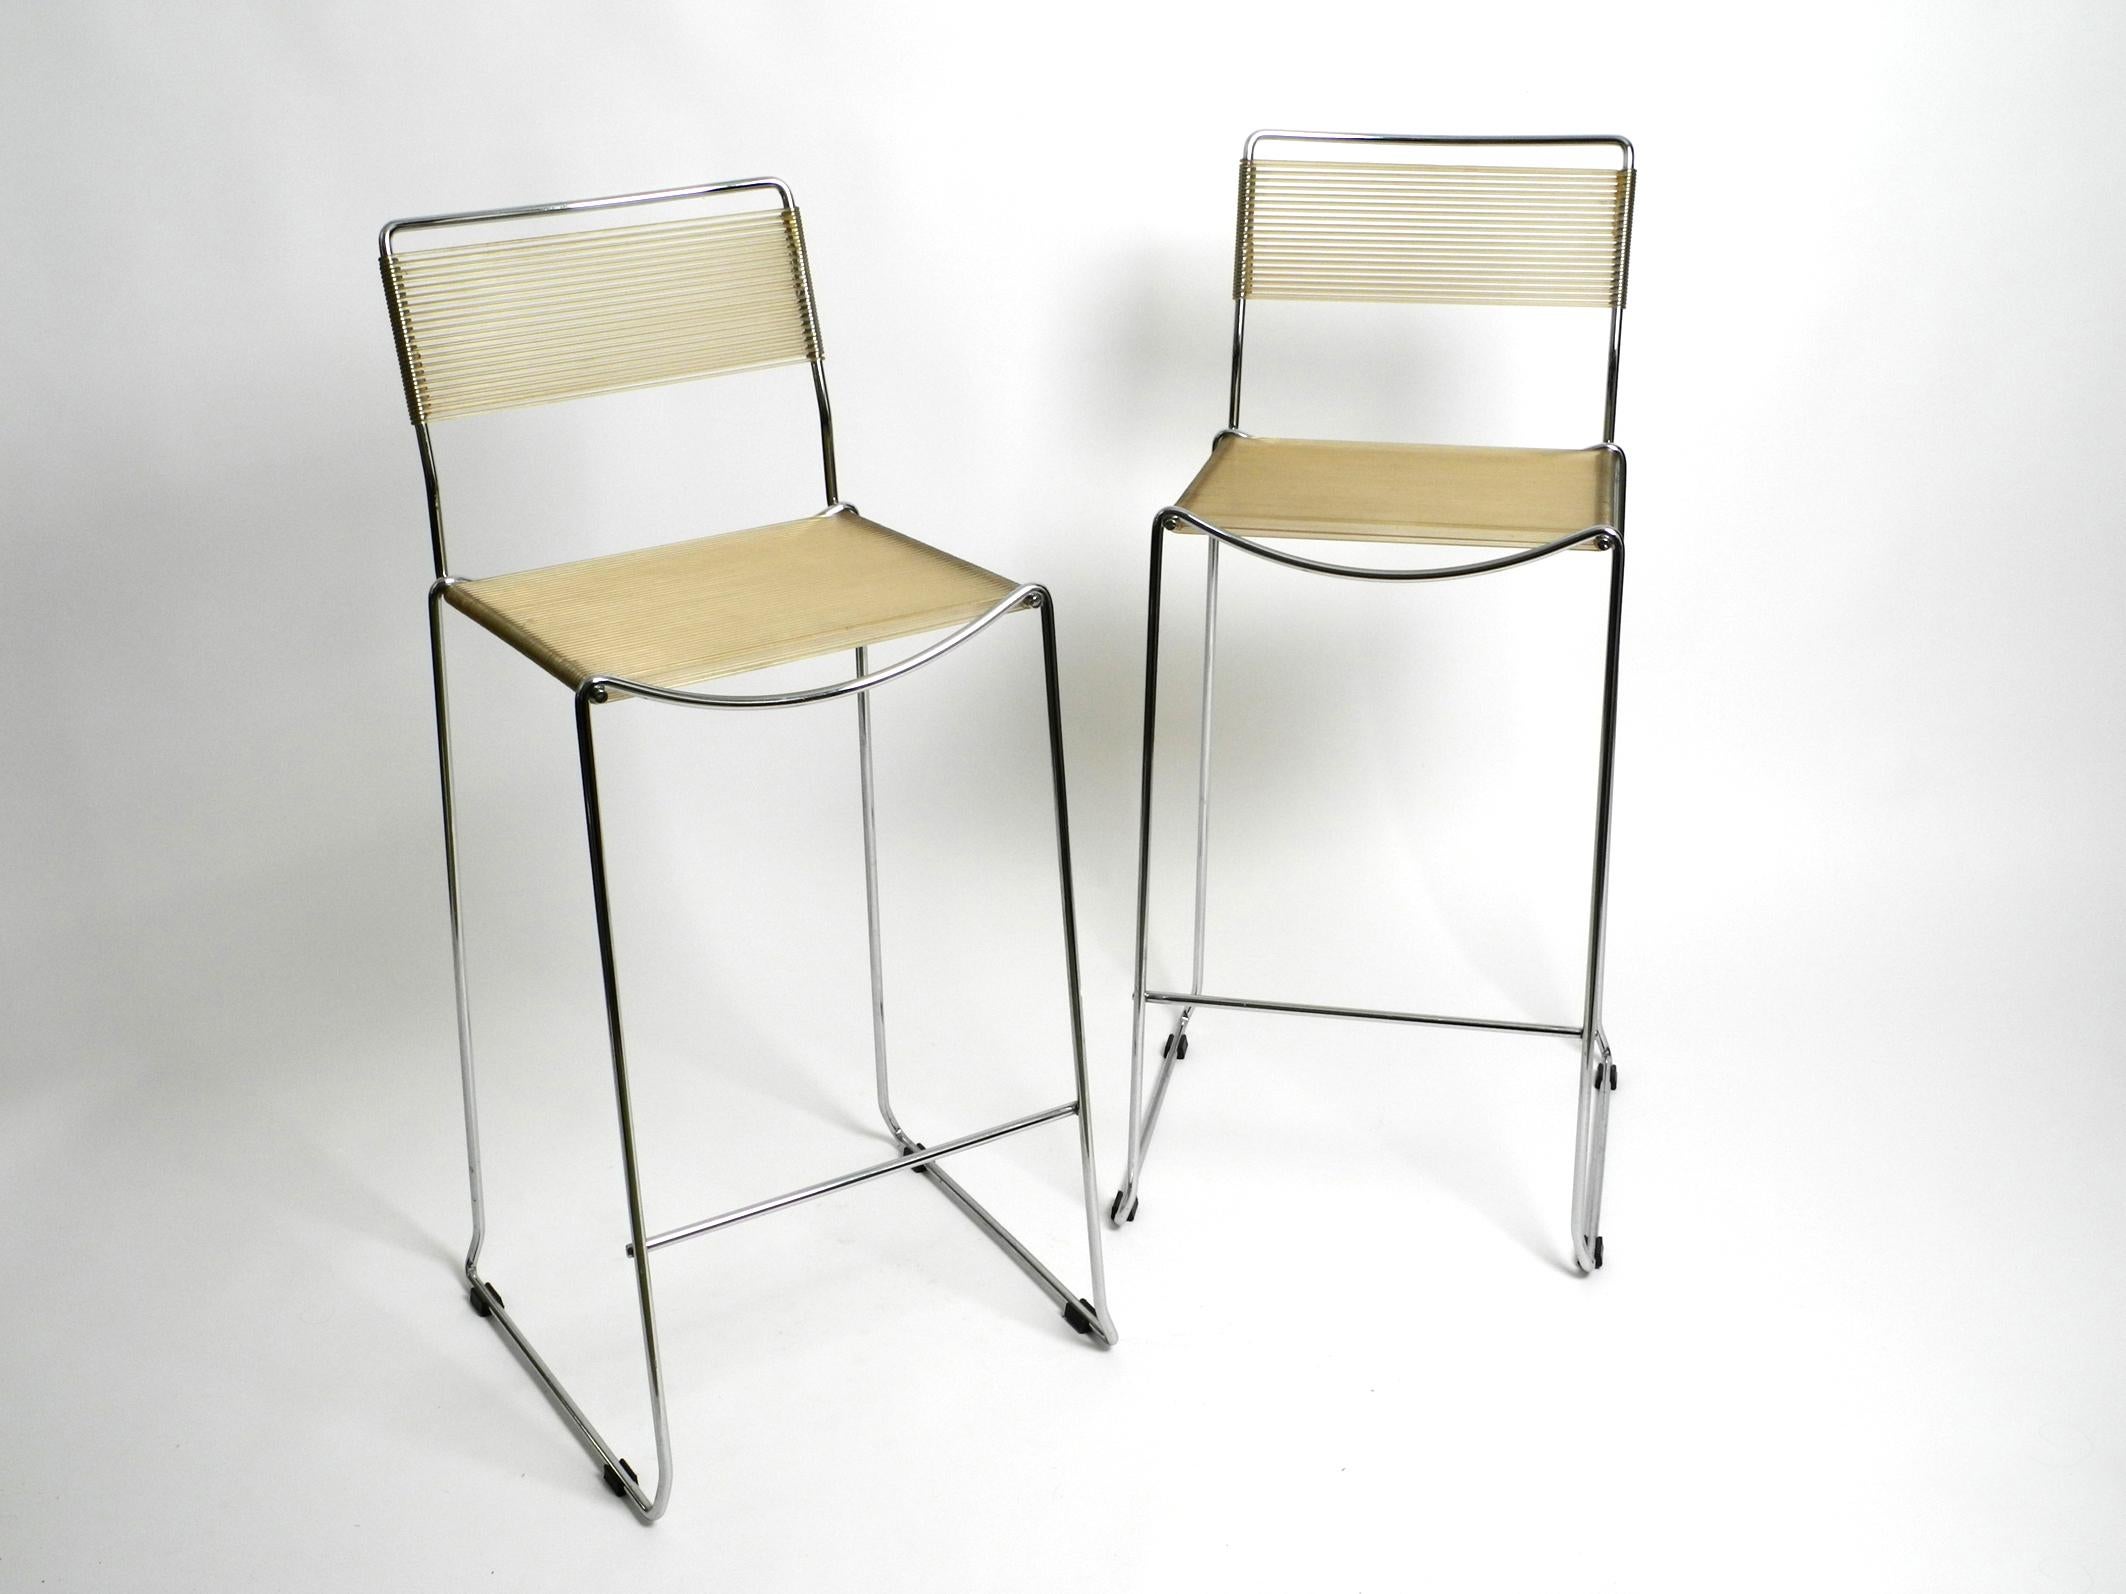 Two rare original 1970s Spaghetti bar stools with chrome frames.
Design by Giandomenico Belotti for Alias. Made in Italy.
Beautiful minimalist Italian design of the Pop Art era.
Very good condition with very few signs of wear.
Both chairs are in the